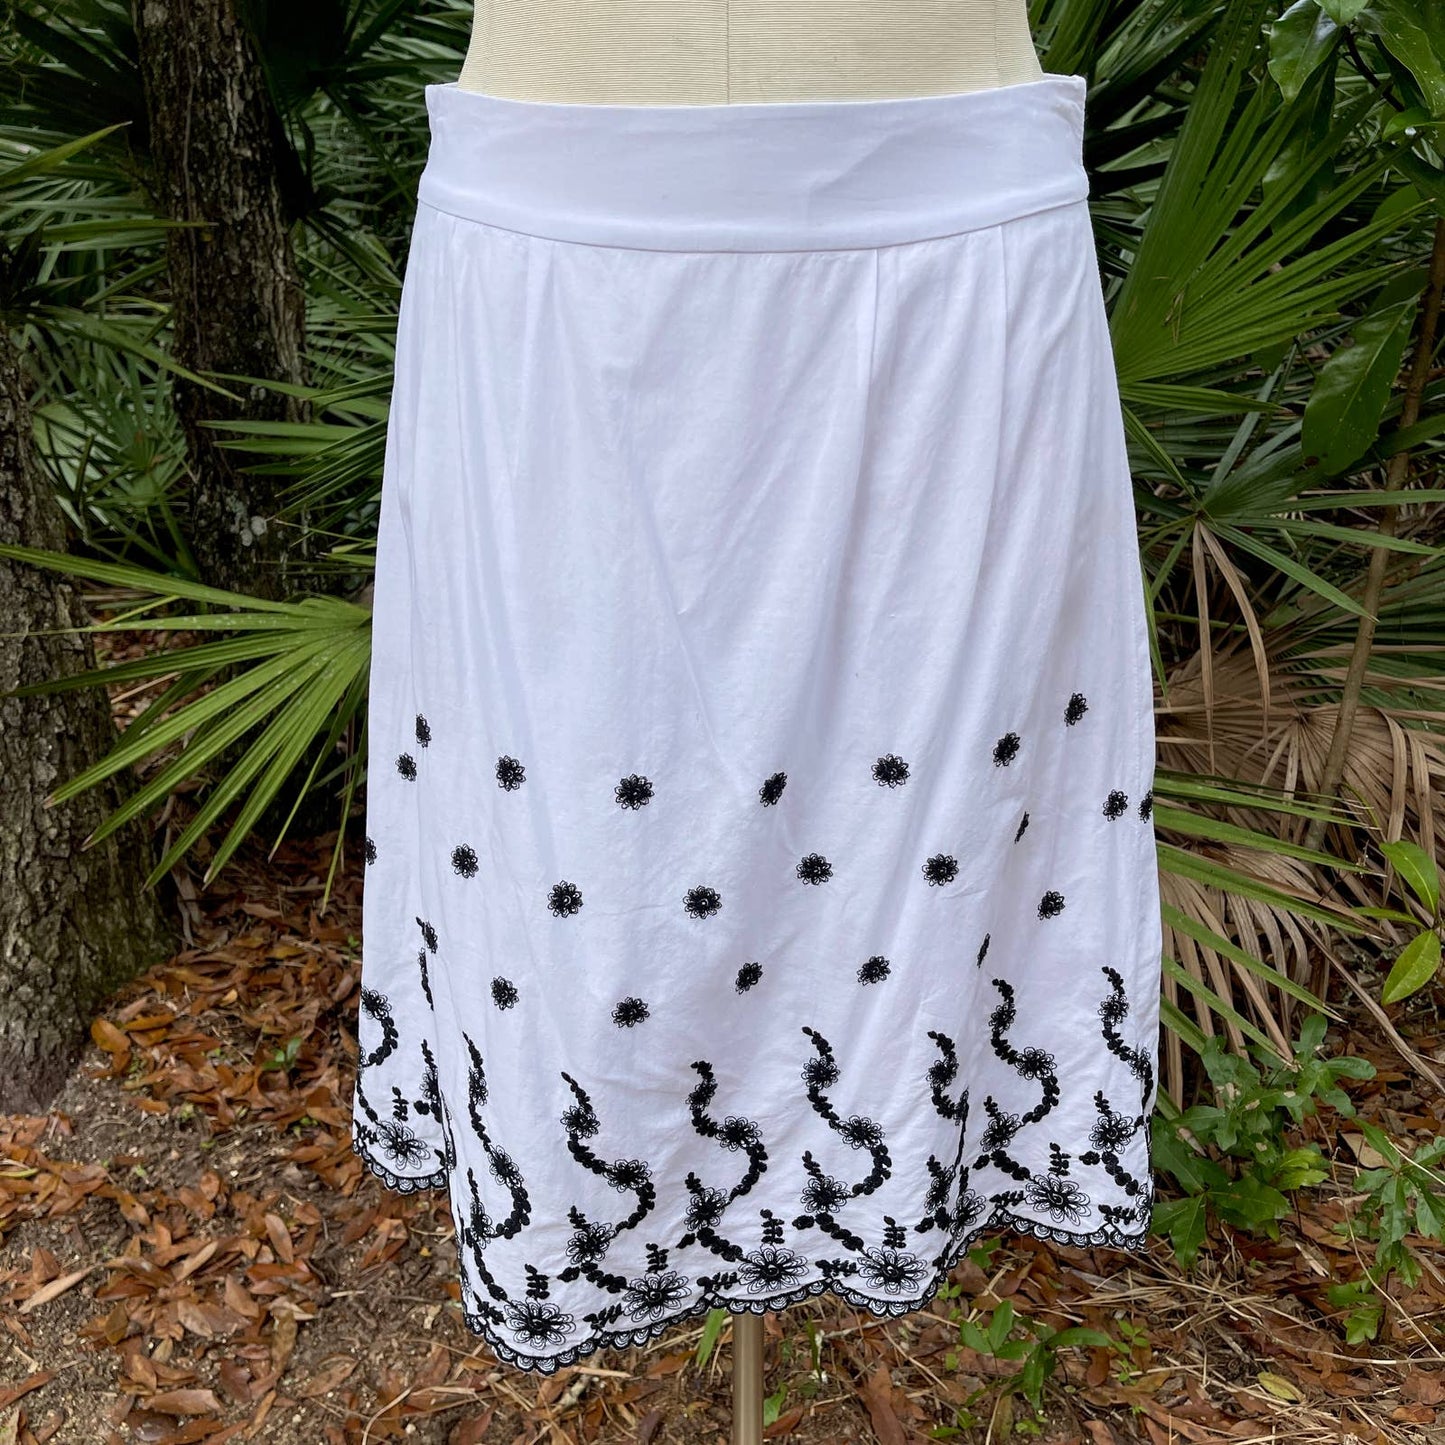 90s Vintage White Cotton Skirt Black Floral Embroidery Jody of California Size L